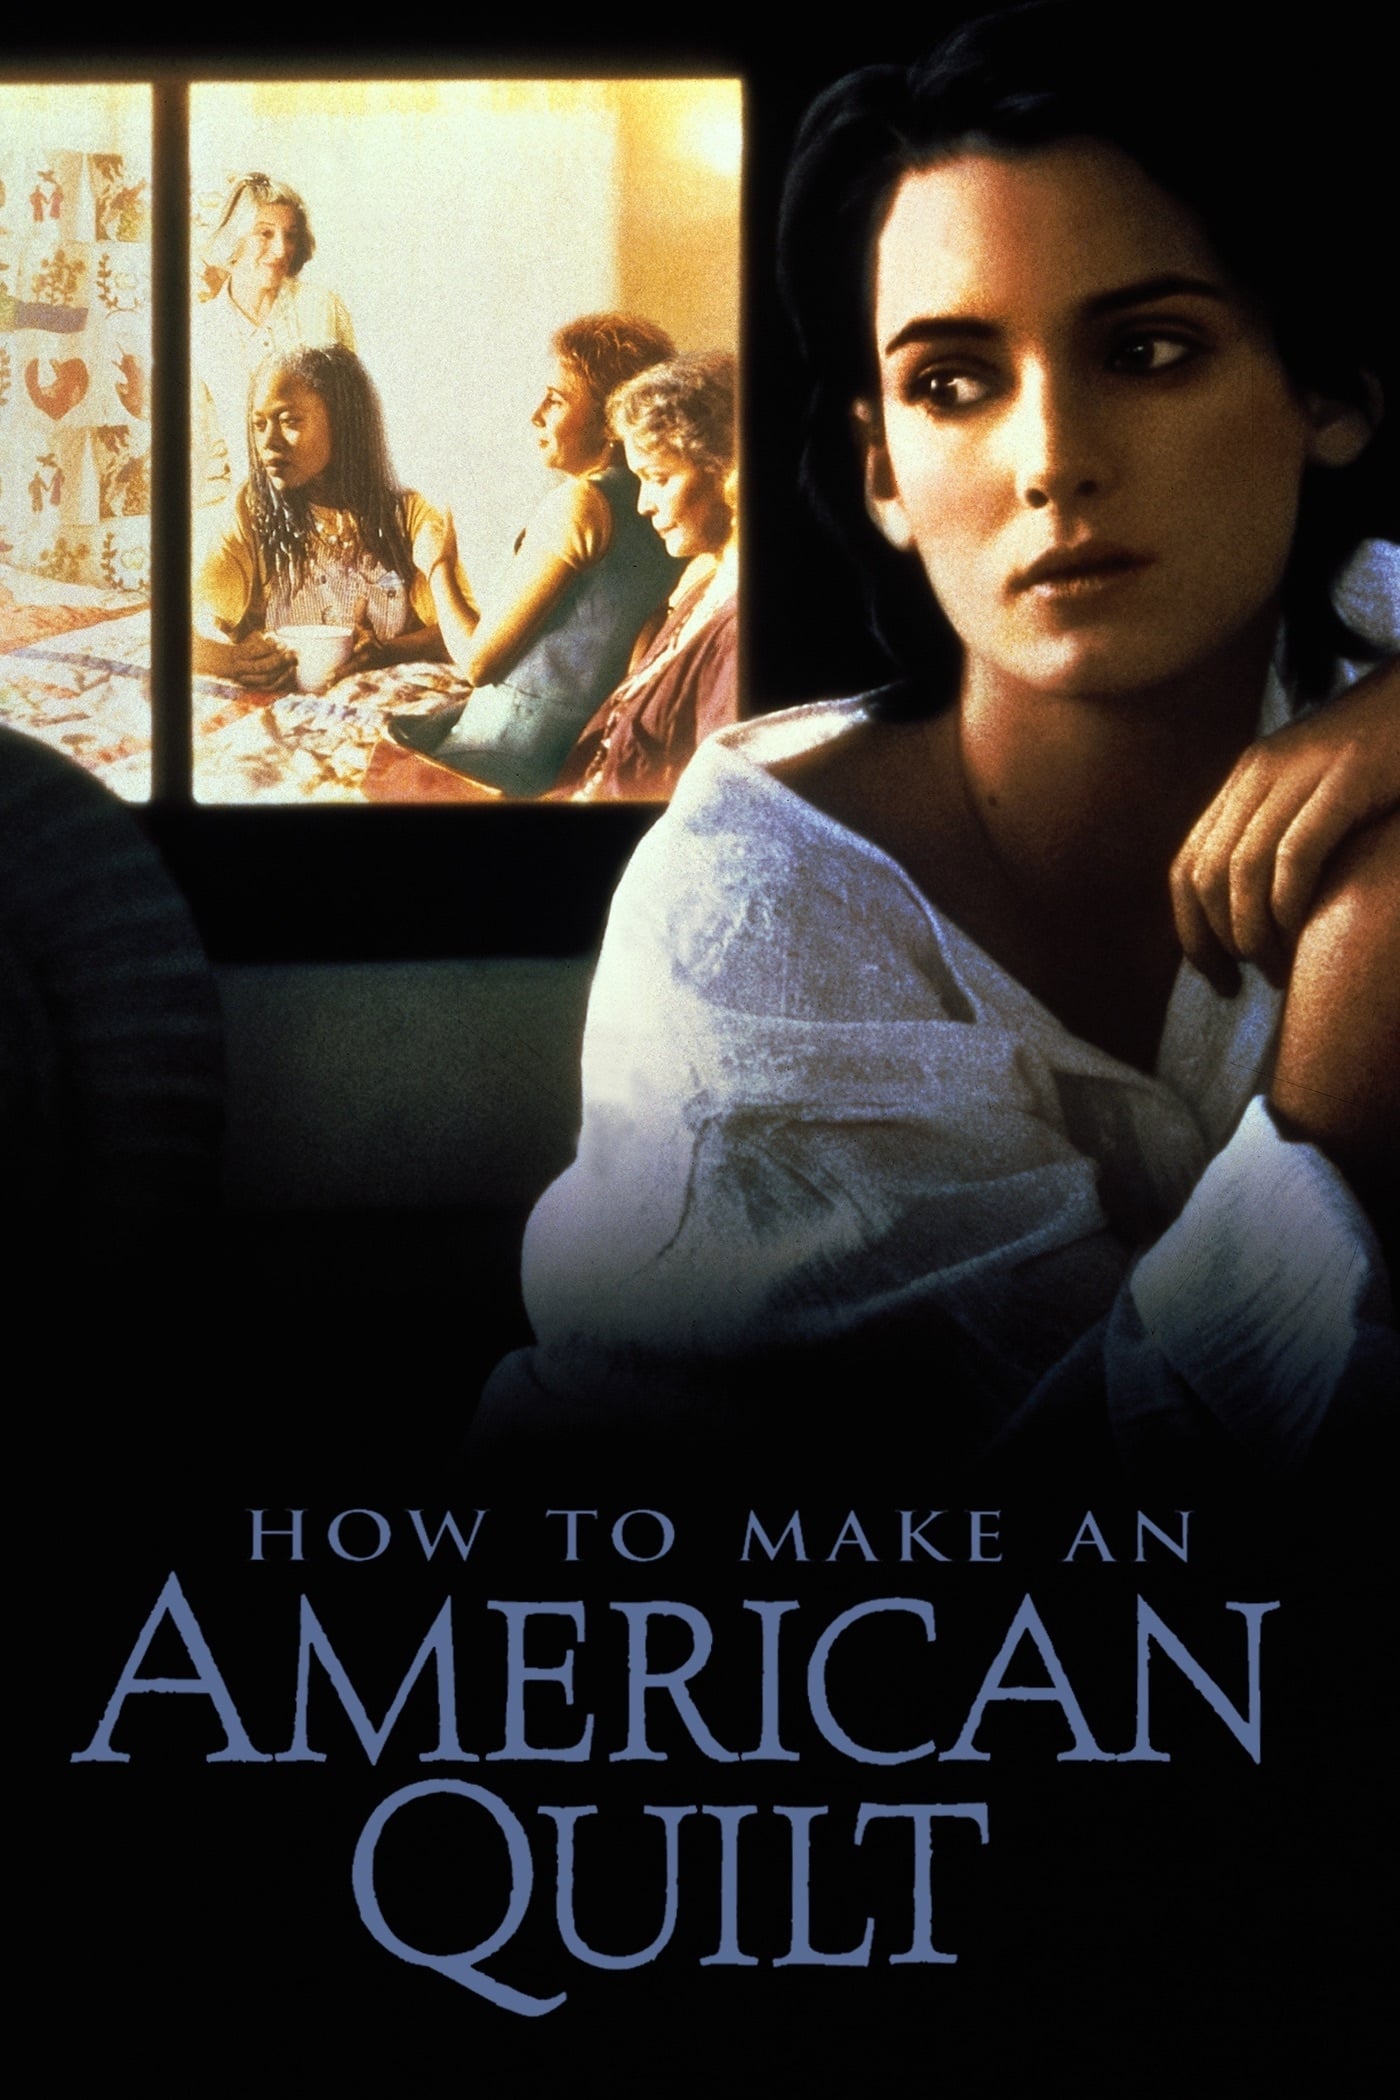 How to Make an American Quilt (1995)